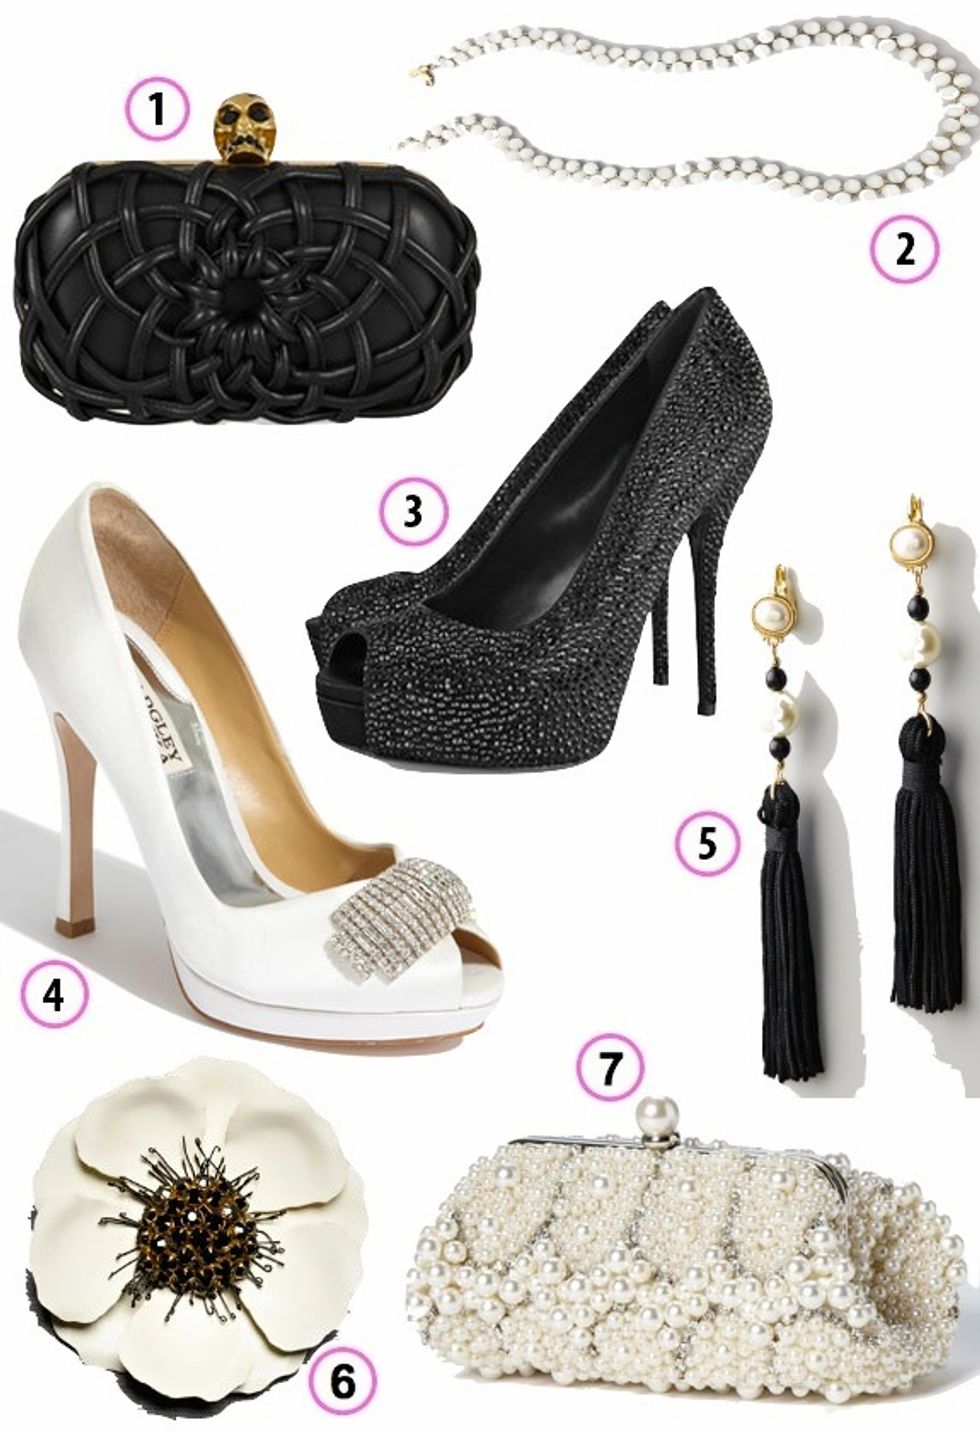 Look of the Week: Women's Accessories for The Black and White Ball